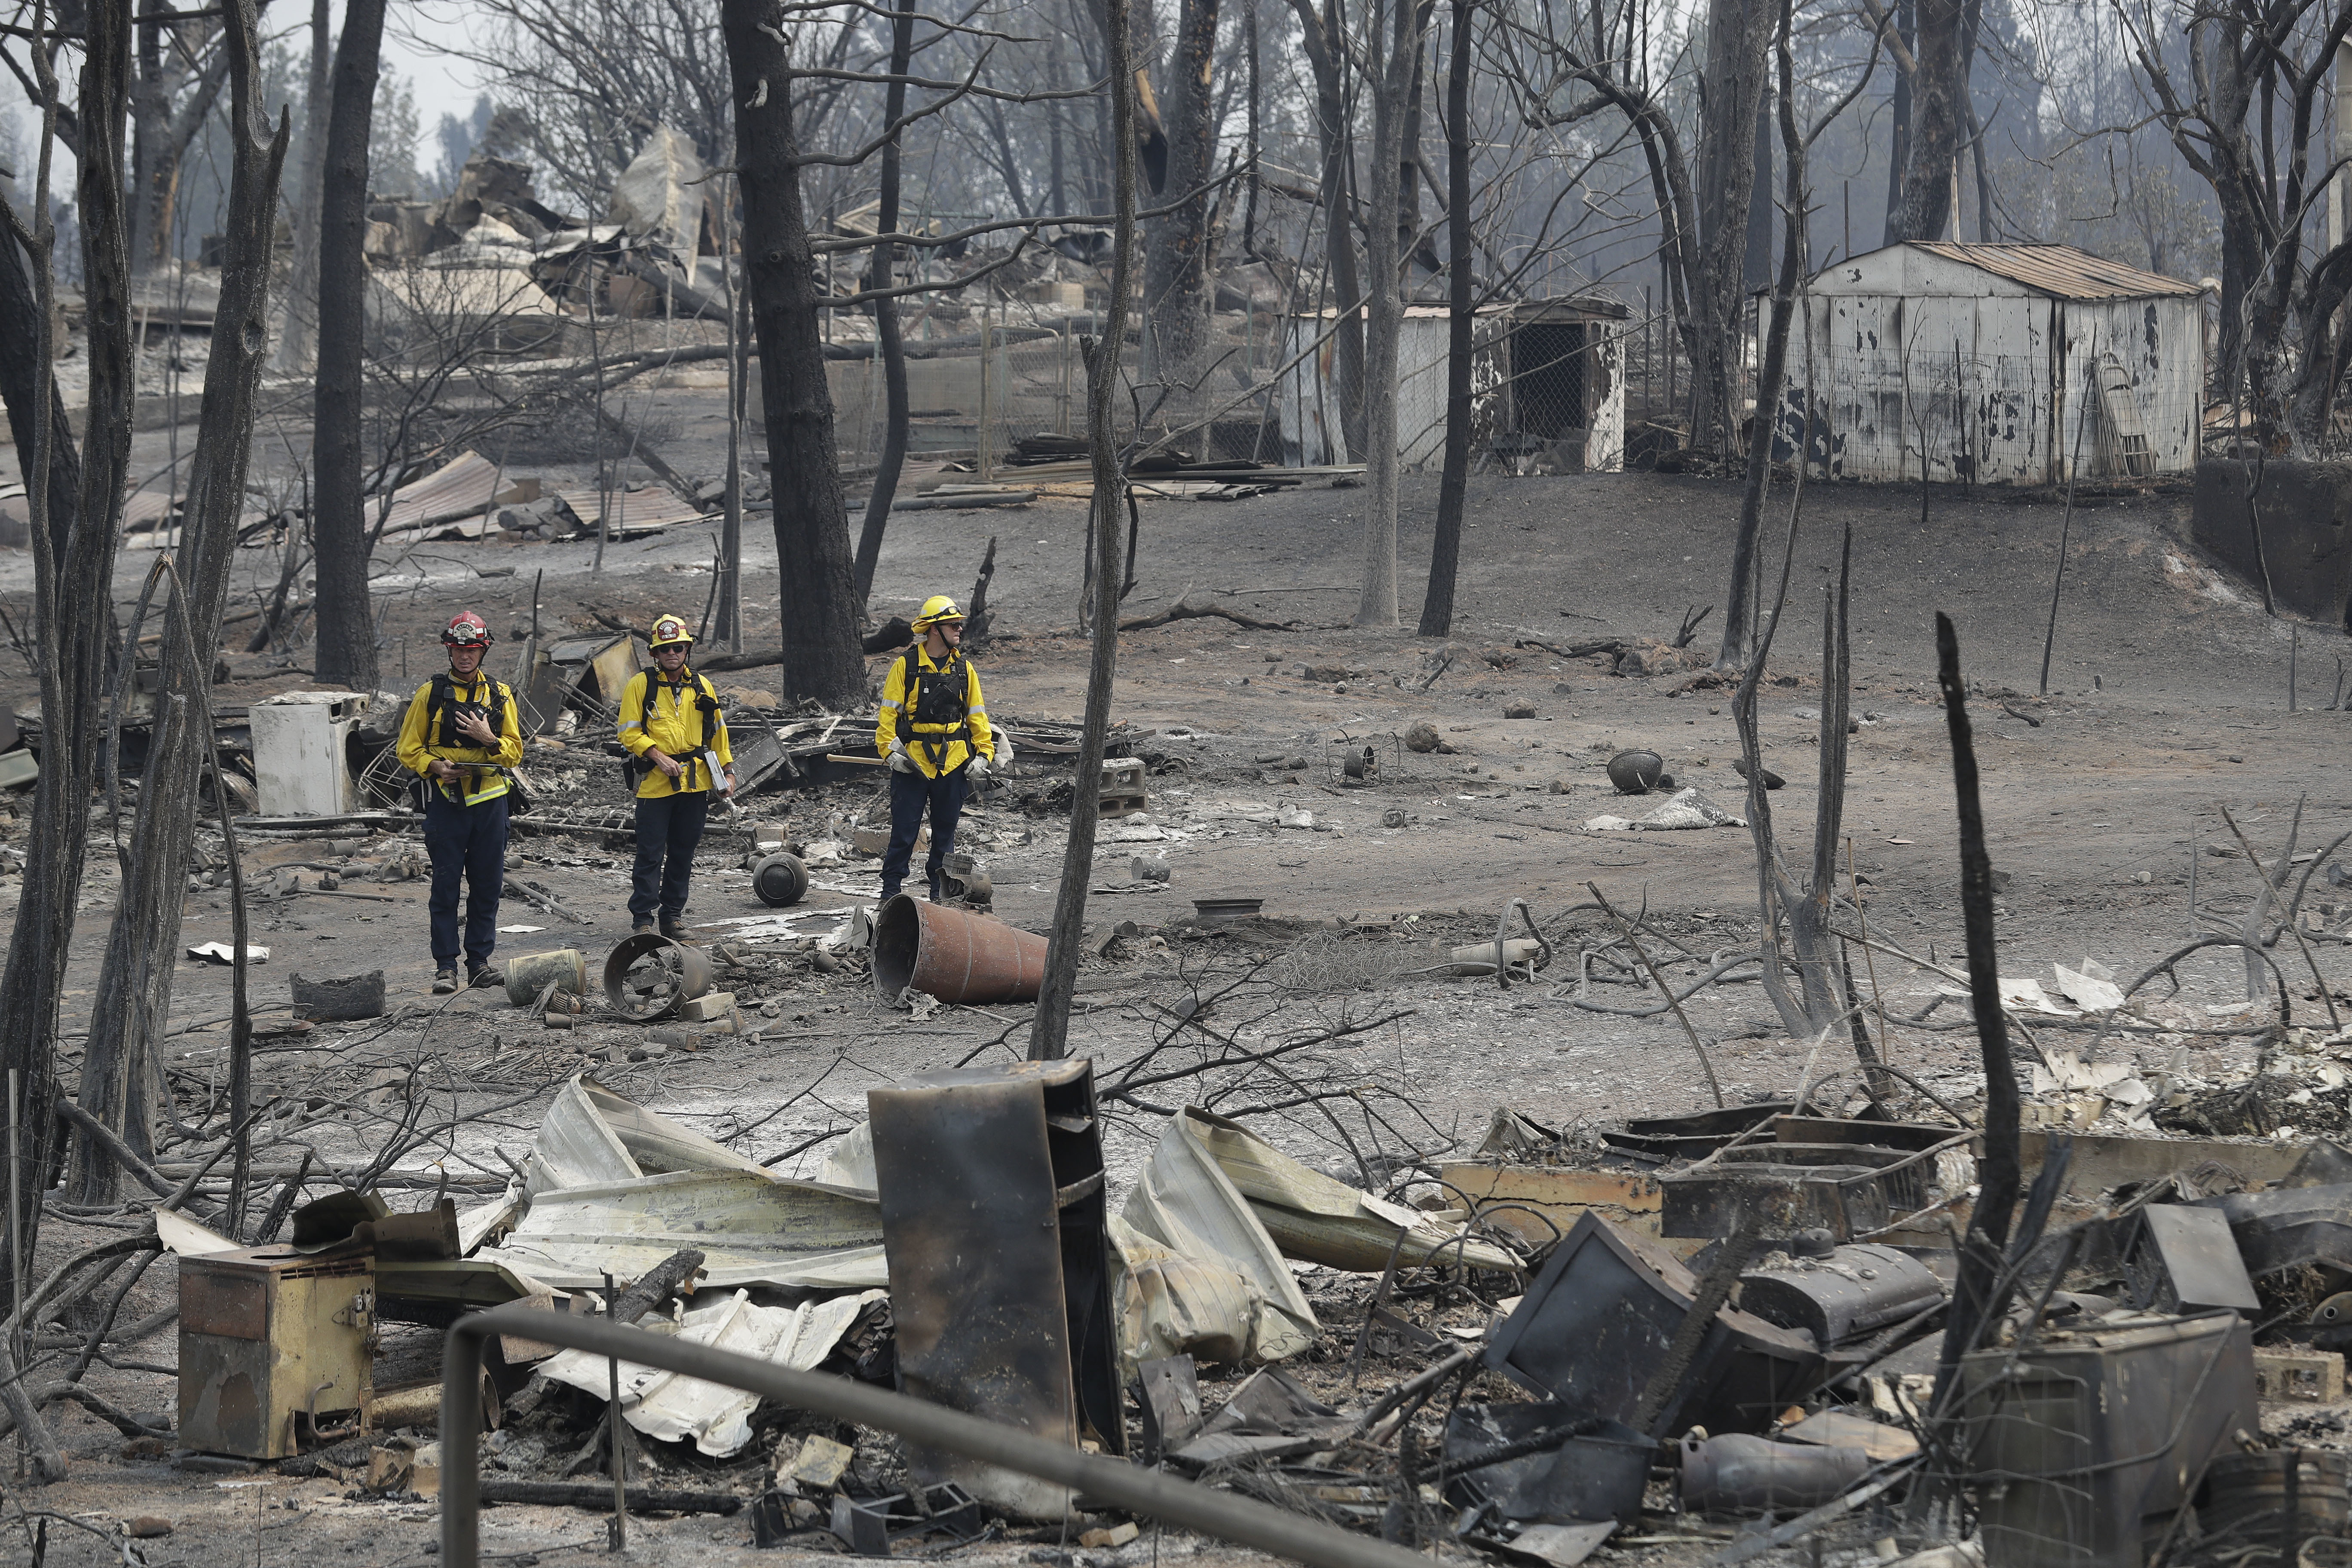 Firefighters assess the damage in the aftermath of a wildfire in Keswick, California 